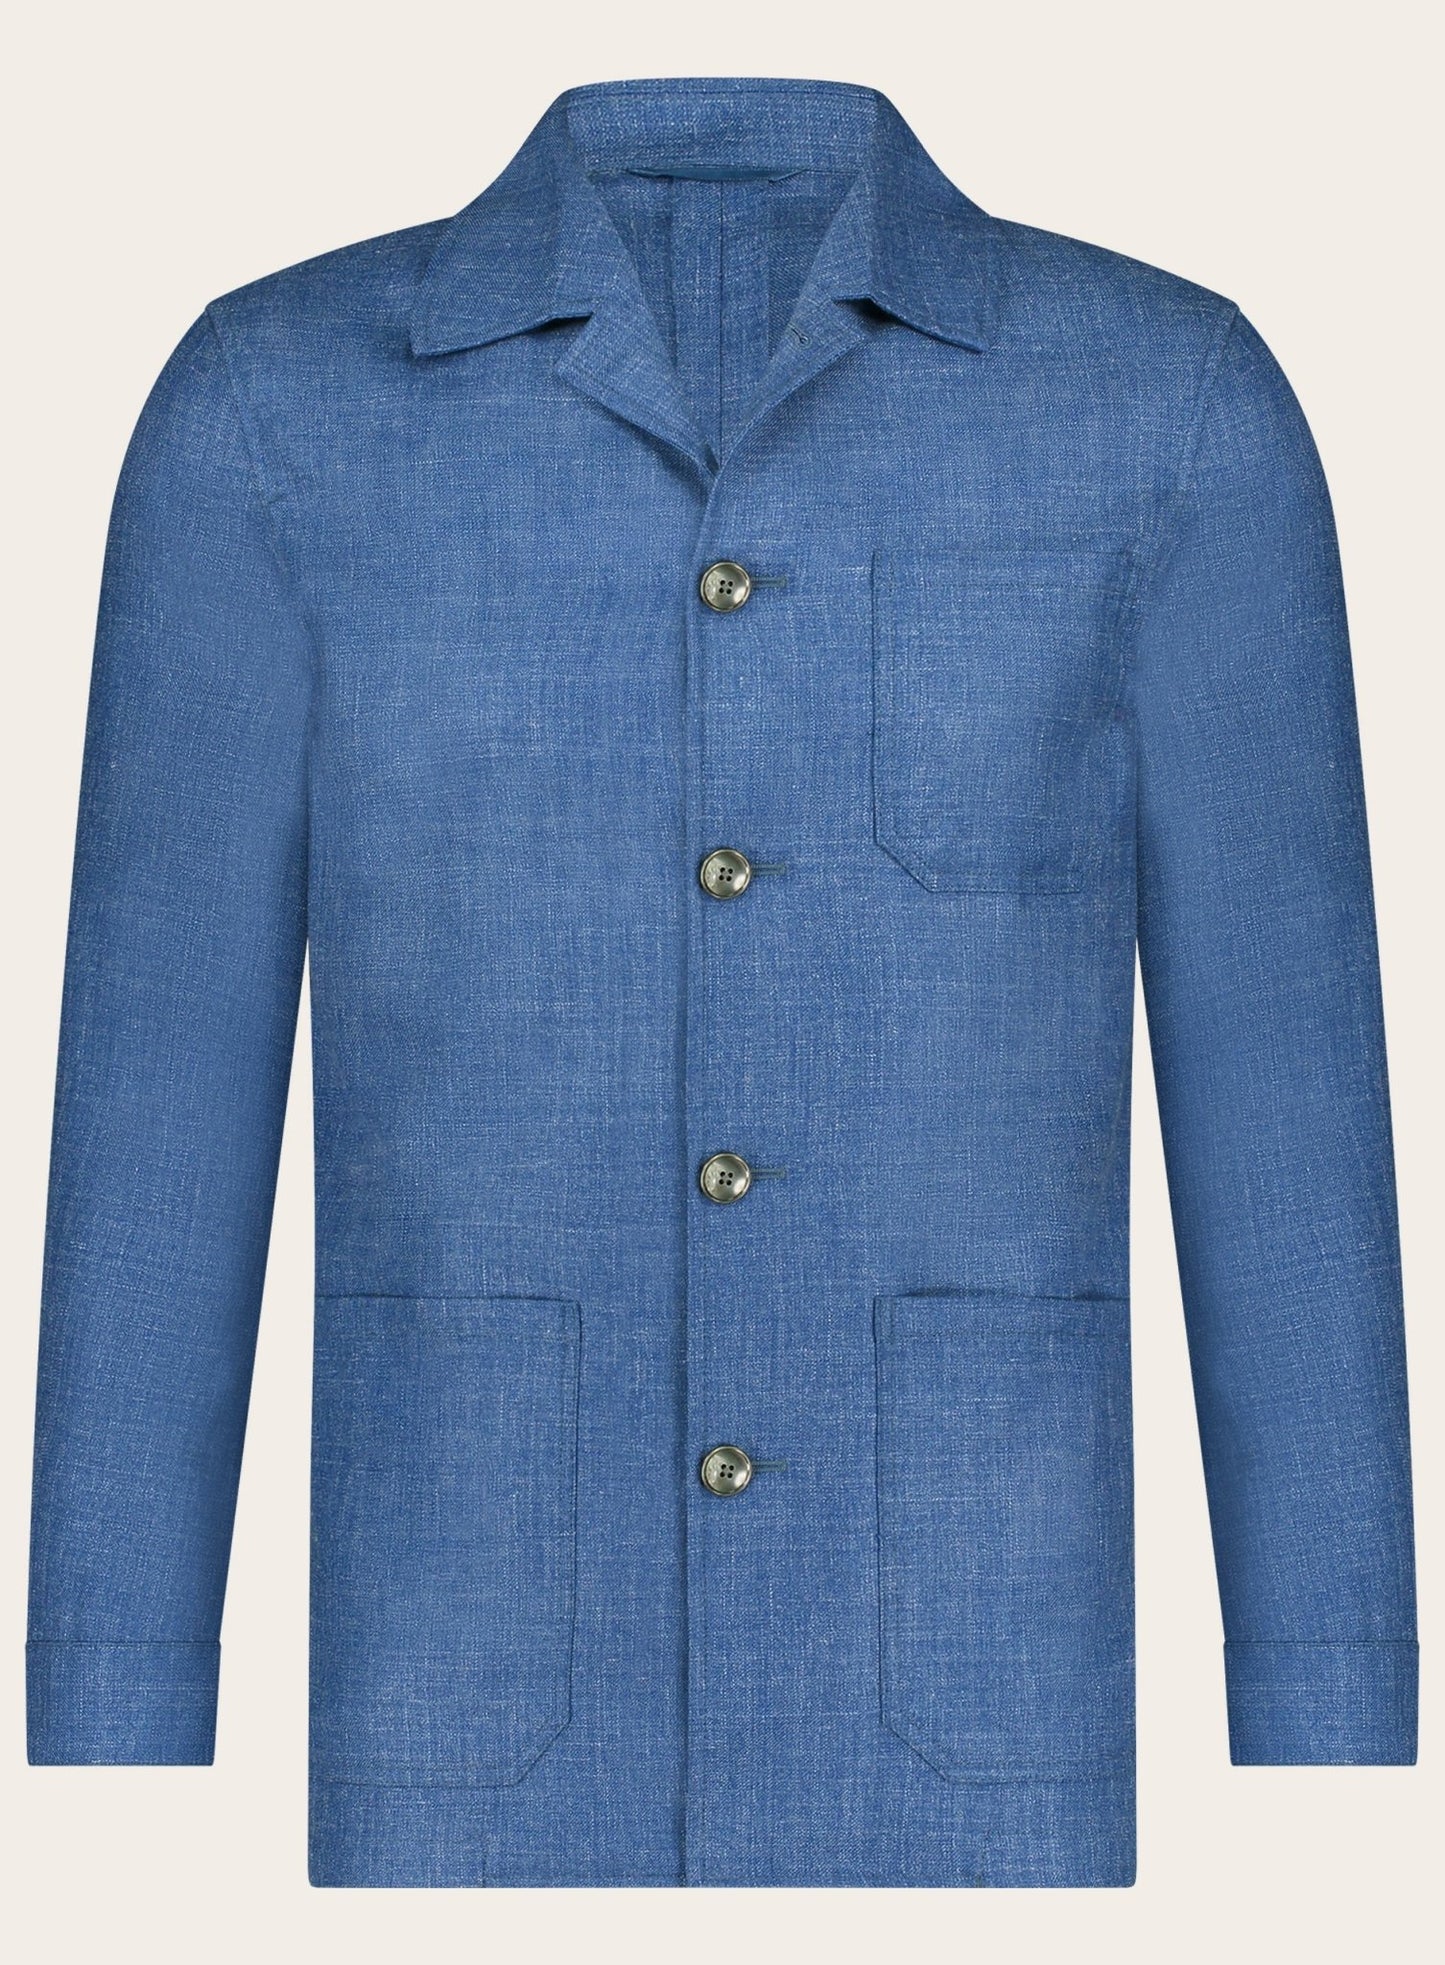 Jacket made of wool, silk and linen